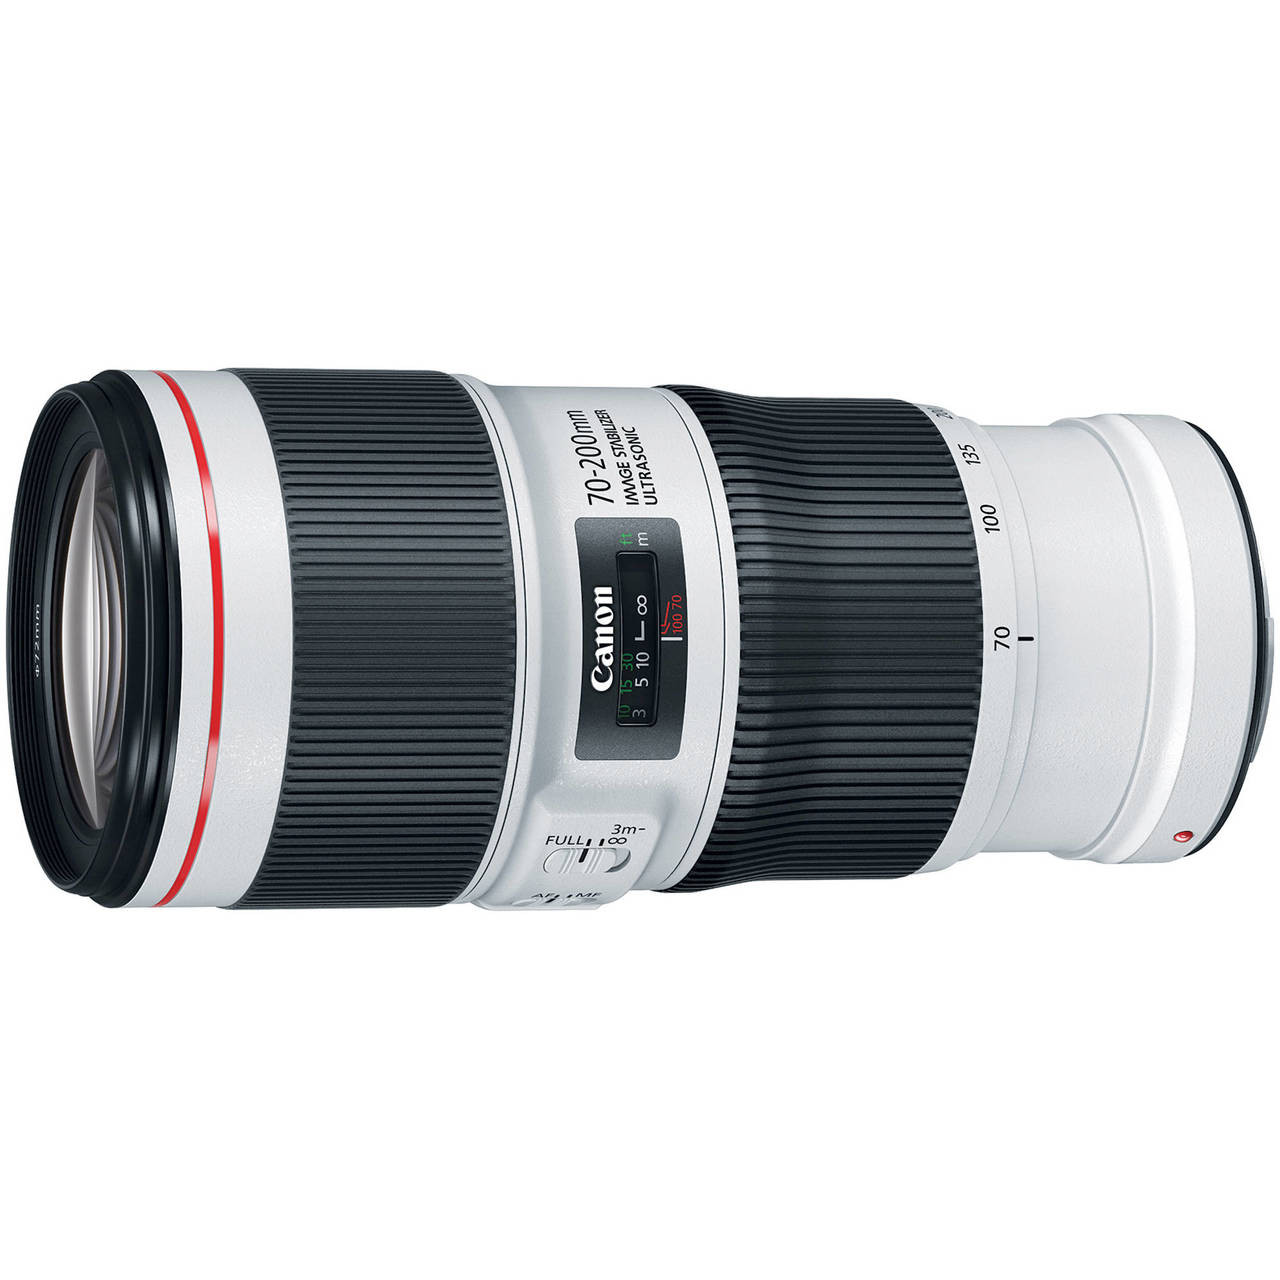 Canon EF 70-200mm f/4L IS II USM Lens - Ace Photo